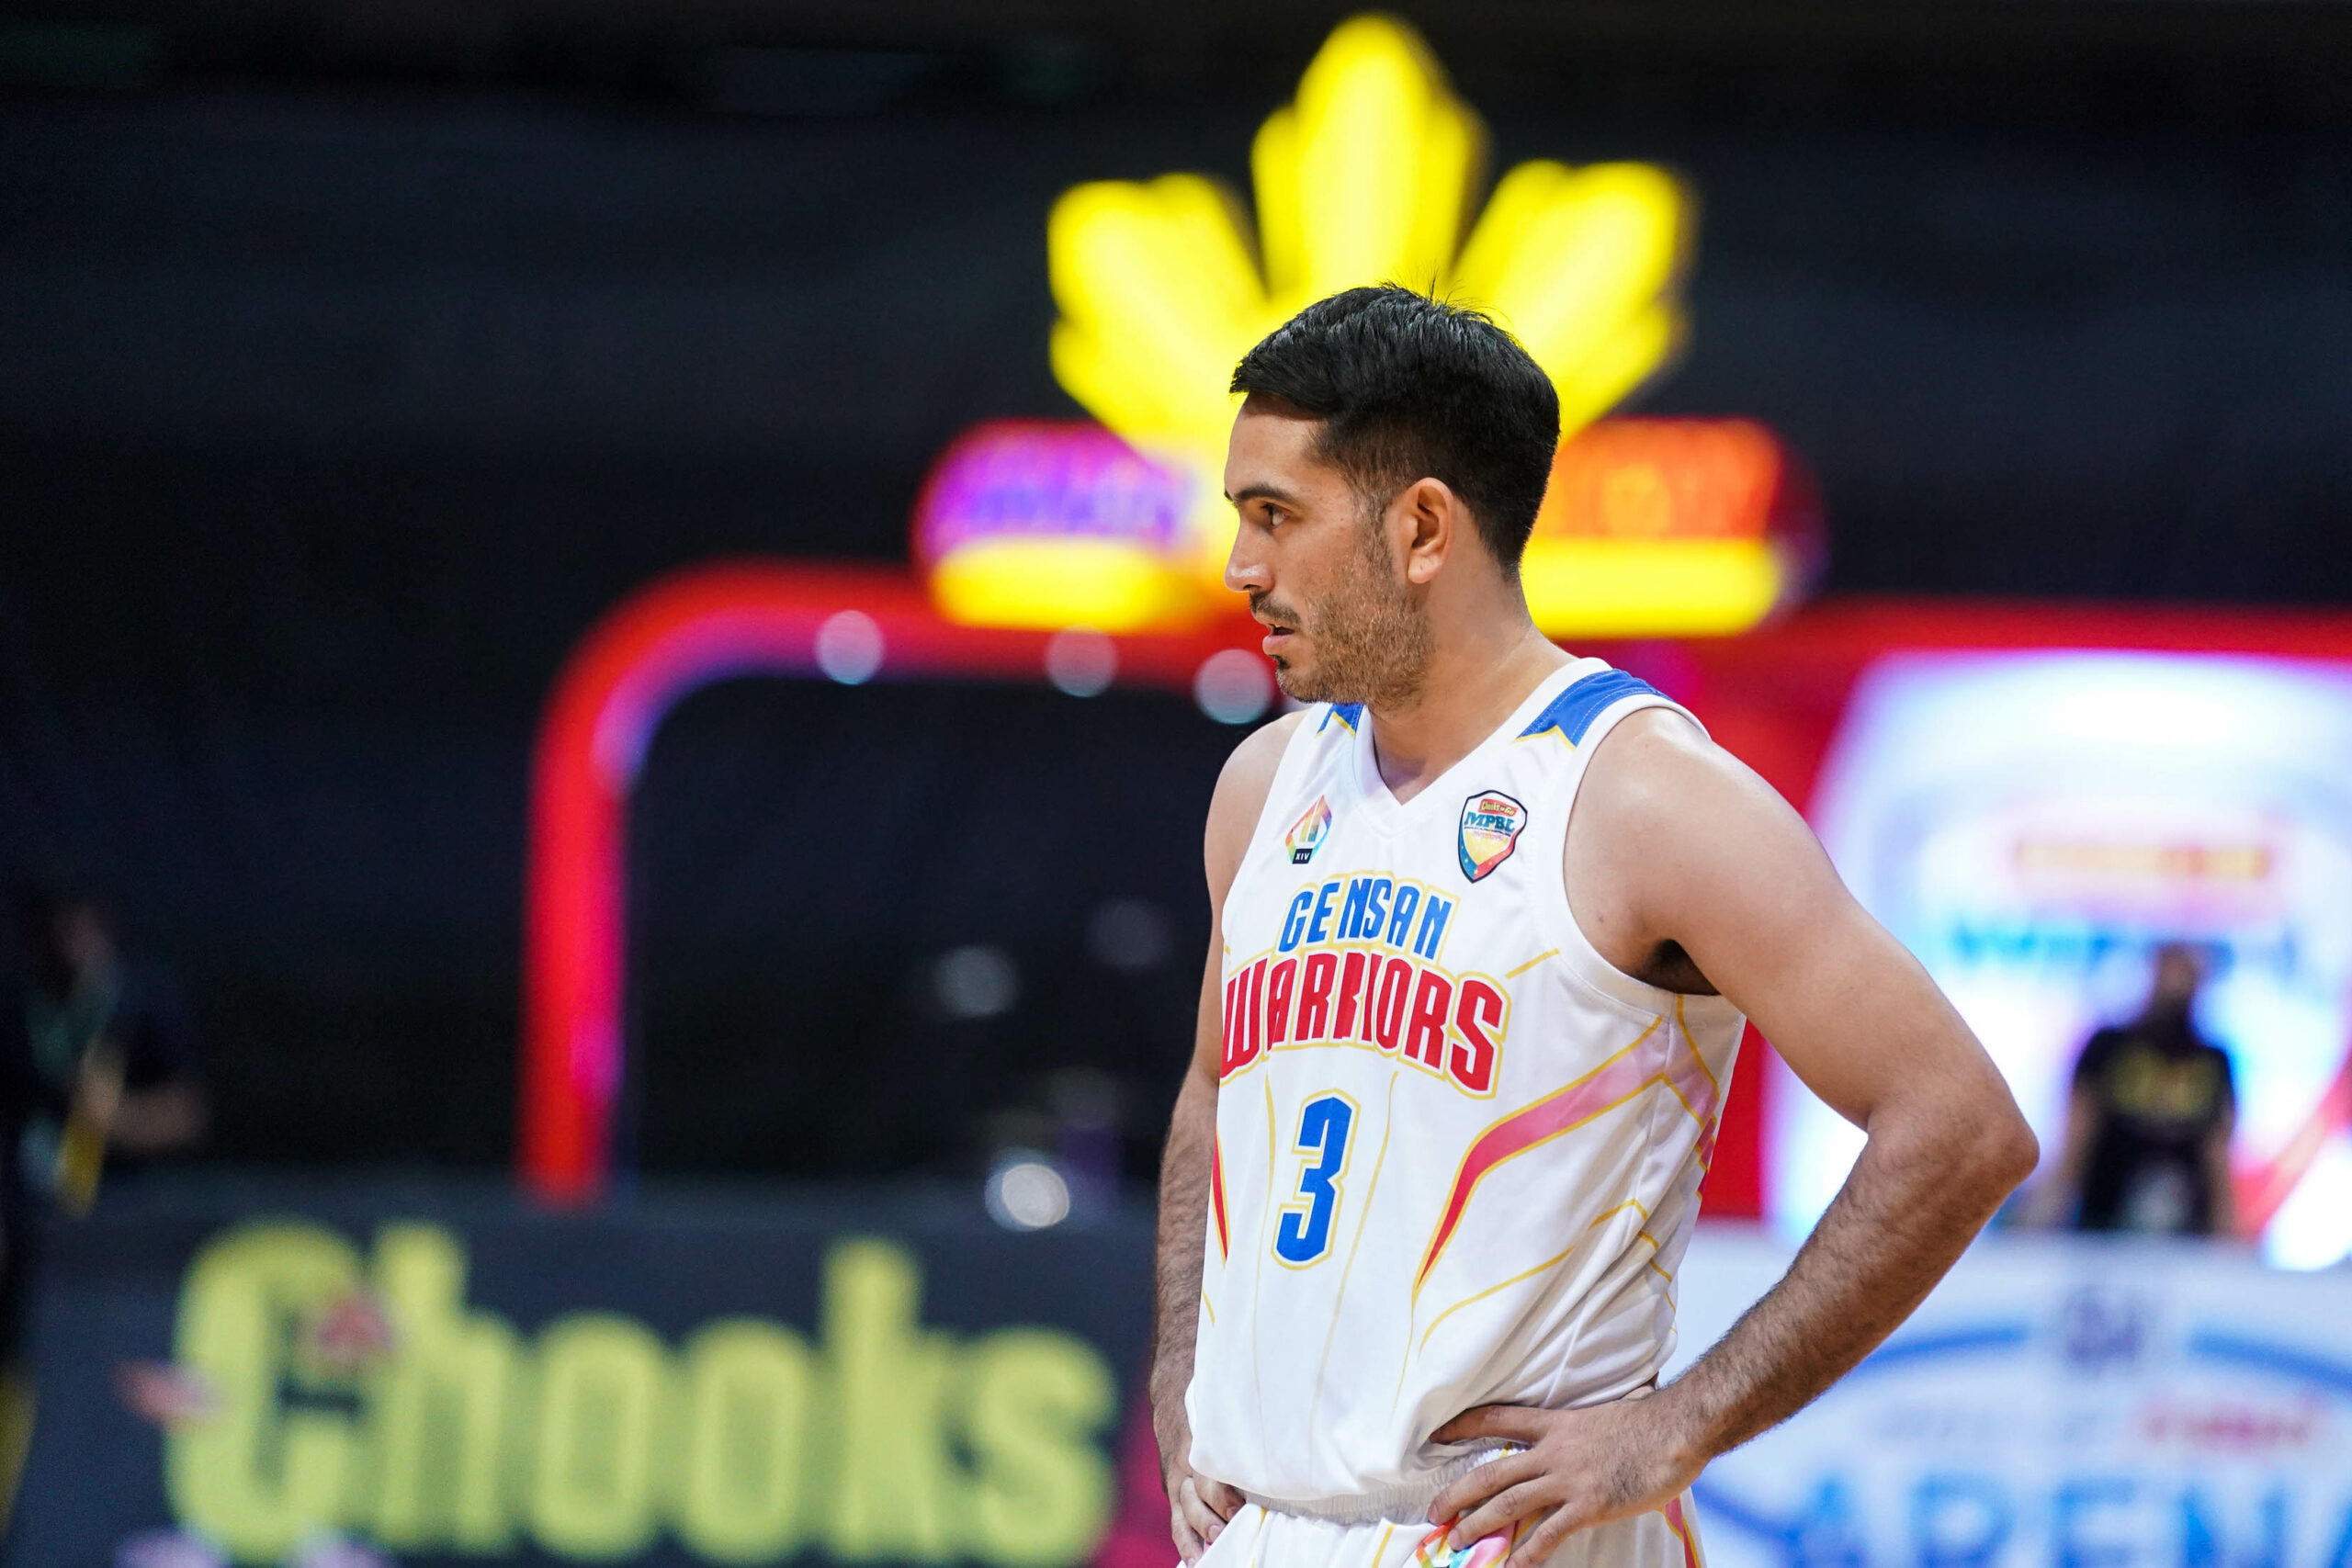 2021-Chooks-MPBL-GenSan-vs-Bulacan-Gerald-Anderson-scaled Gerald Anderson relishes representing hometown GenSan in MPBL Basketball MPBL News  - philippine sports news